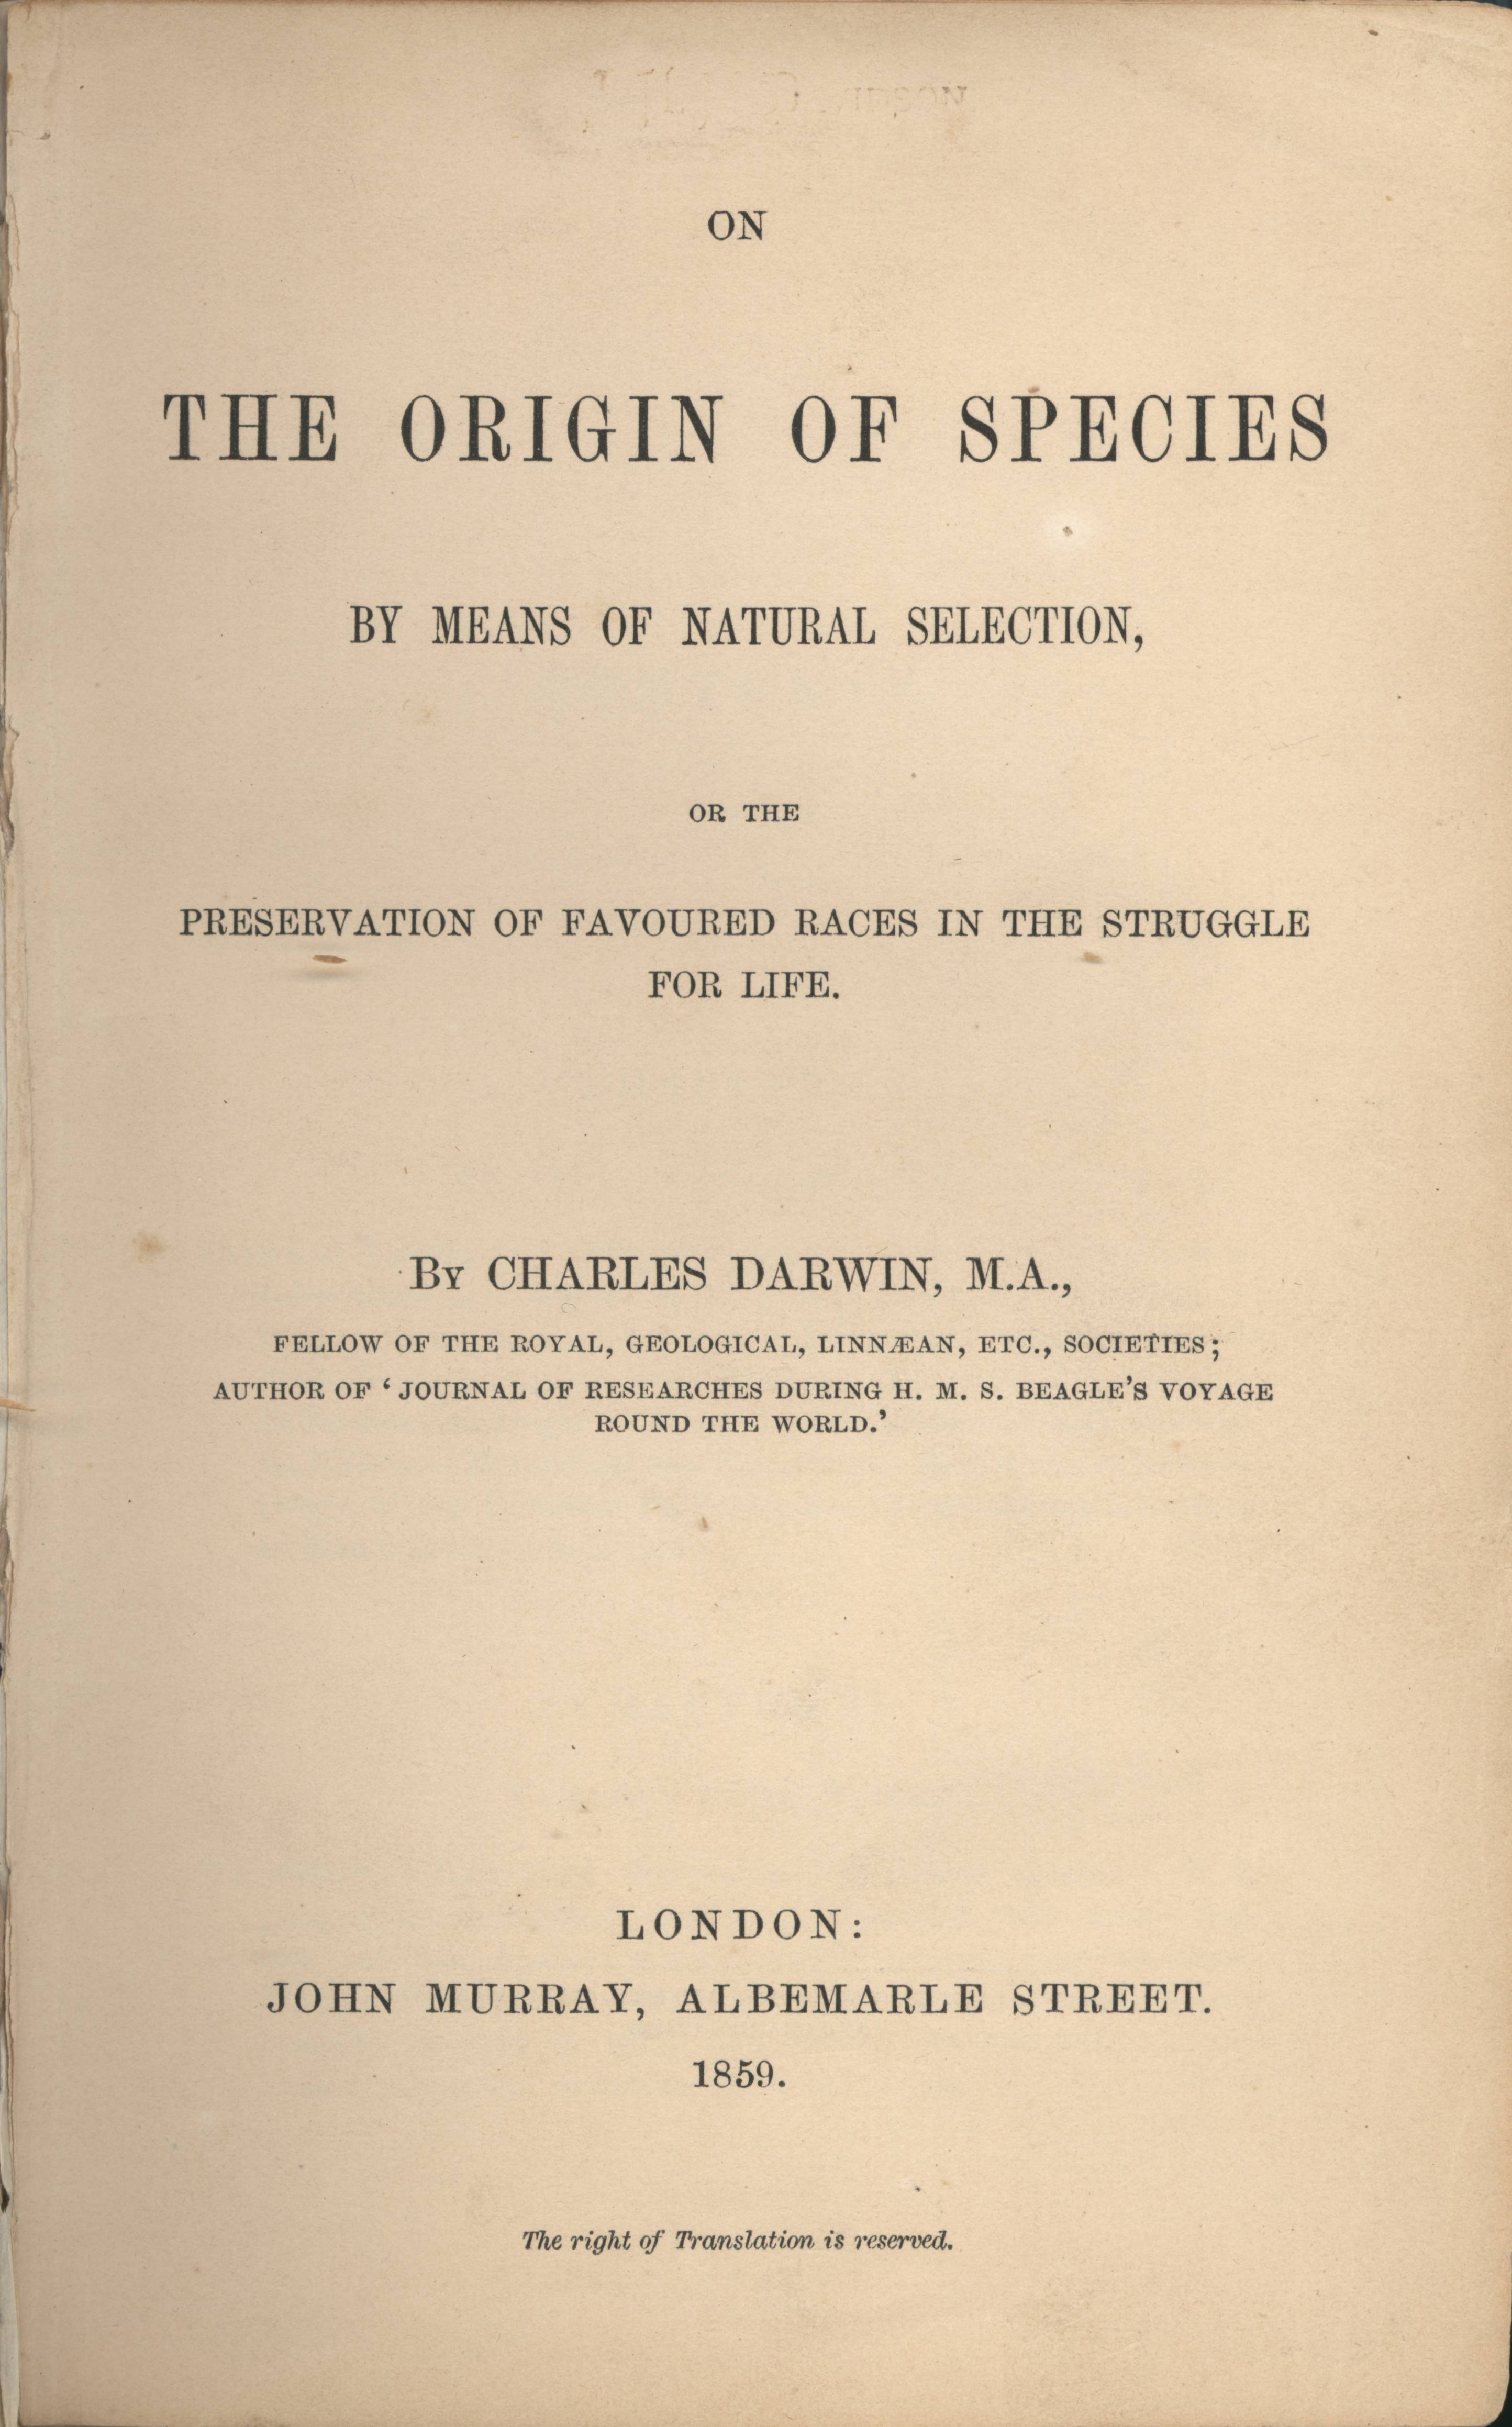 The title page of On the Origin of Species by Charles Darwin